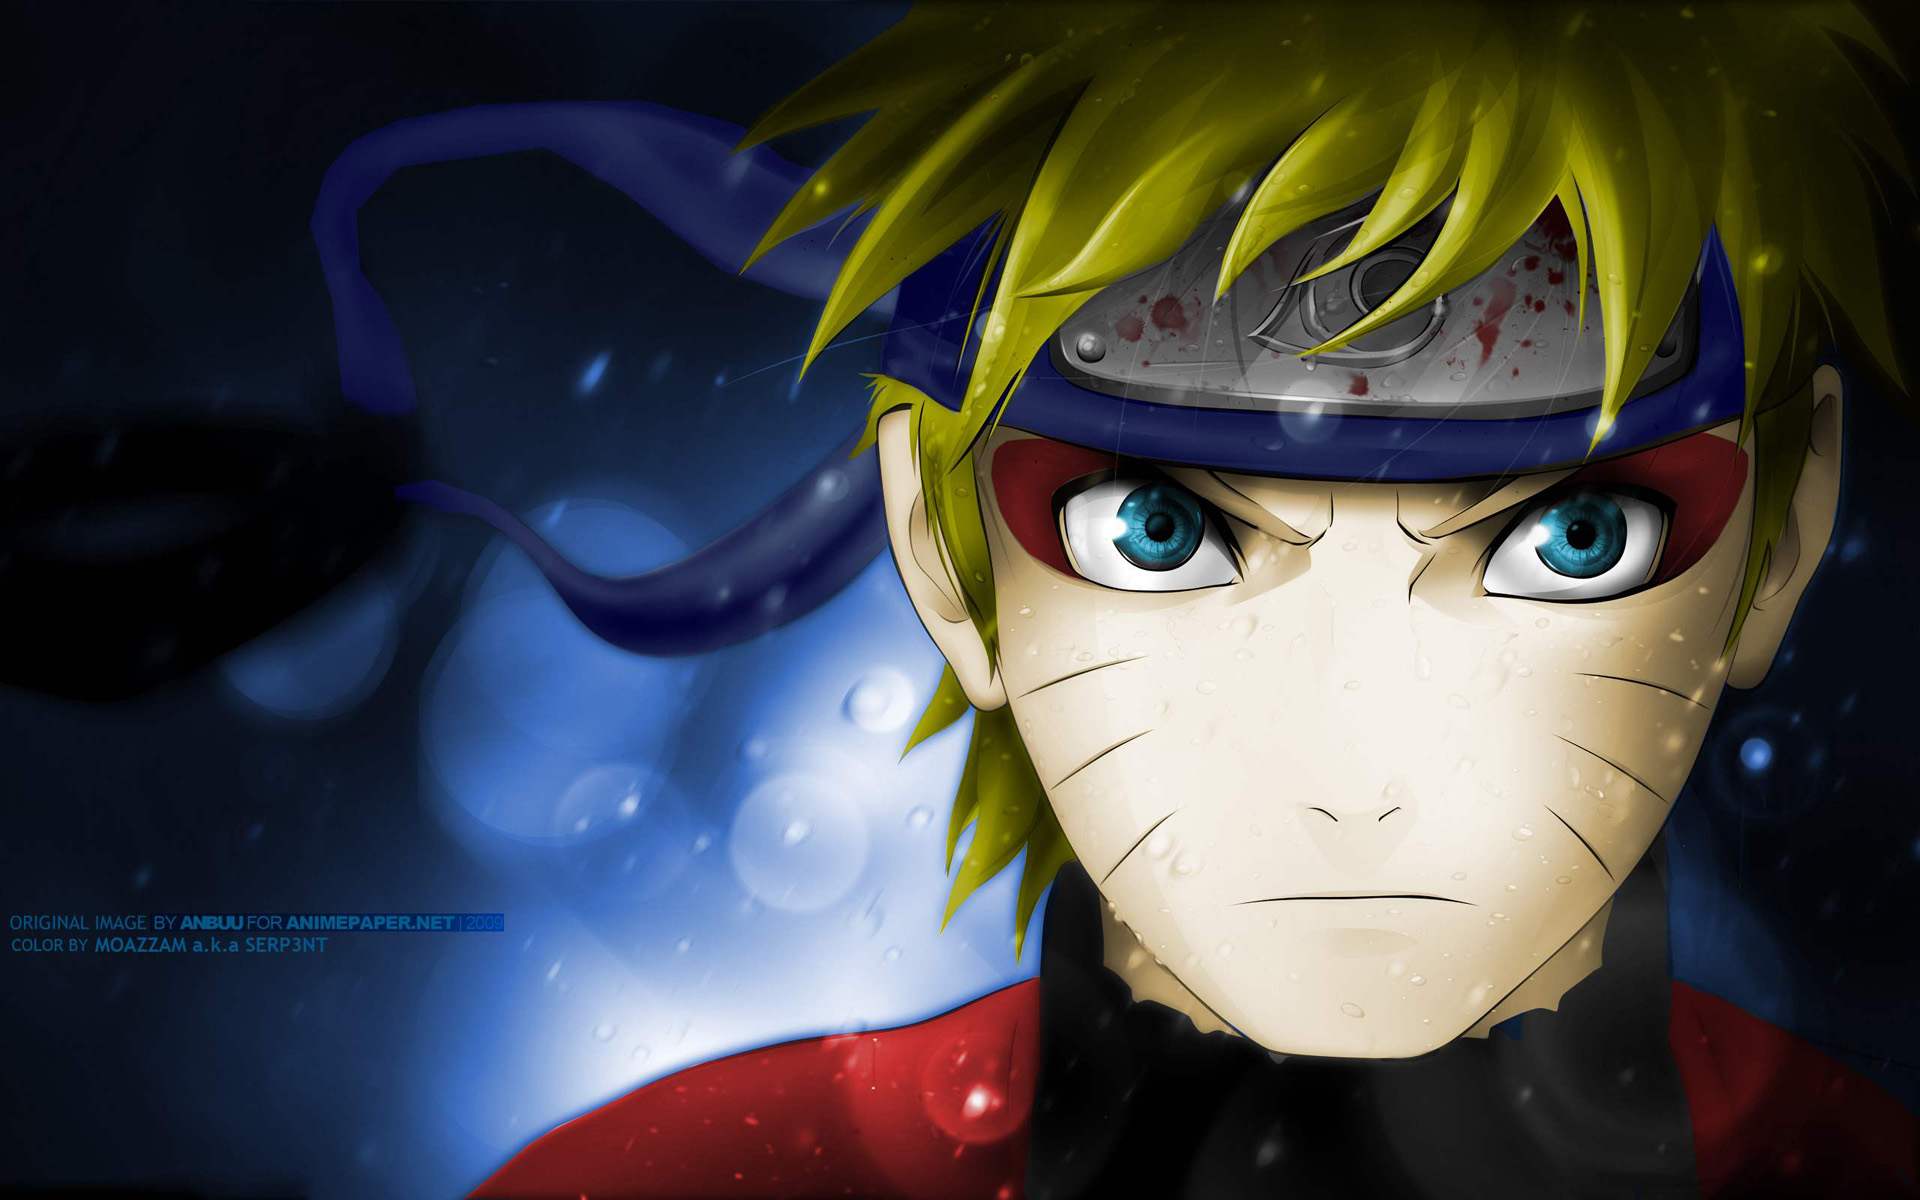 Download Wallpaper Naruto For Android